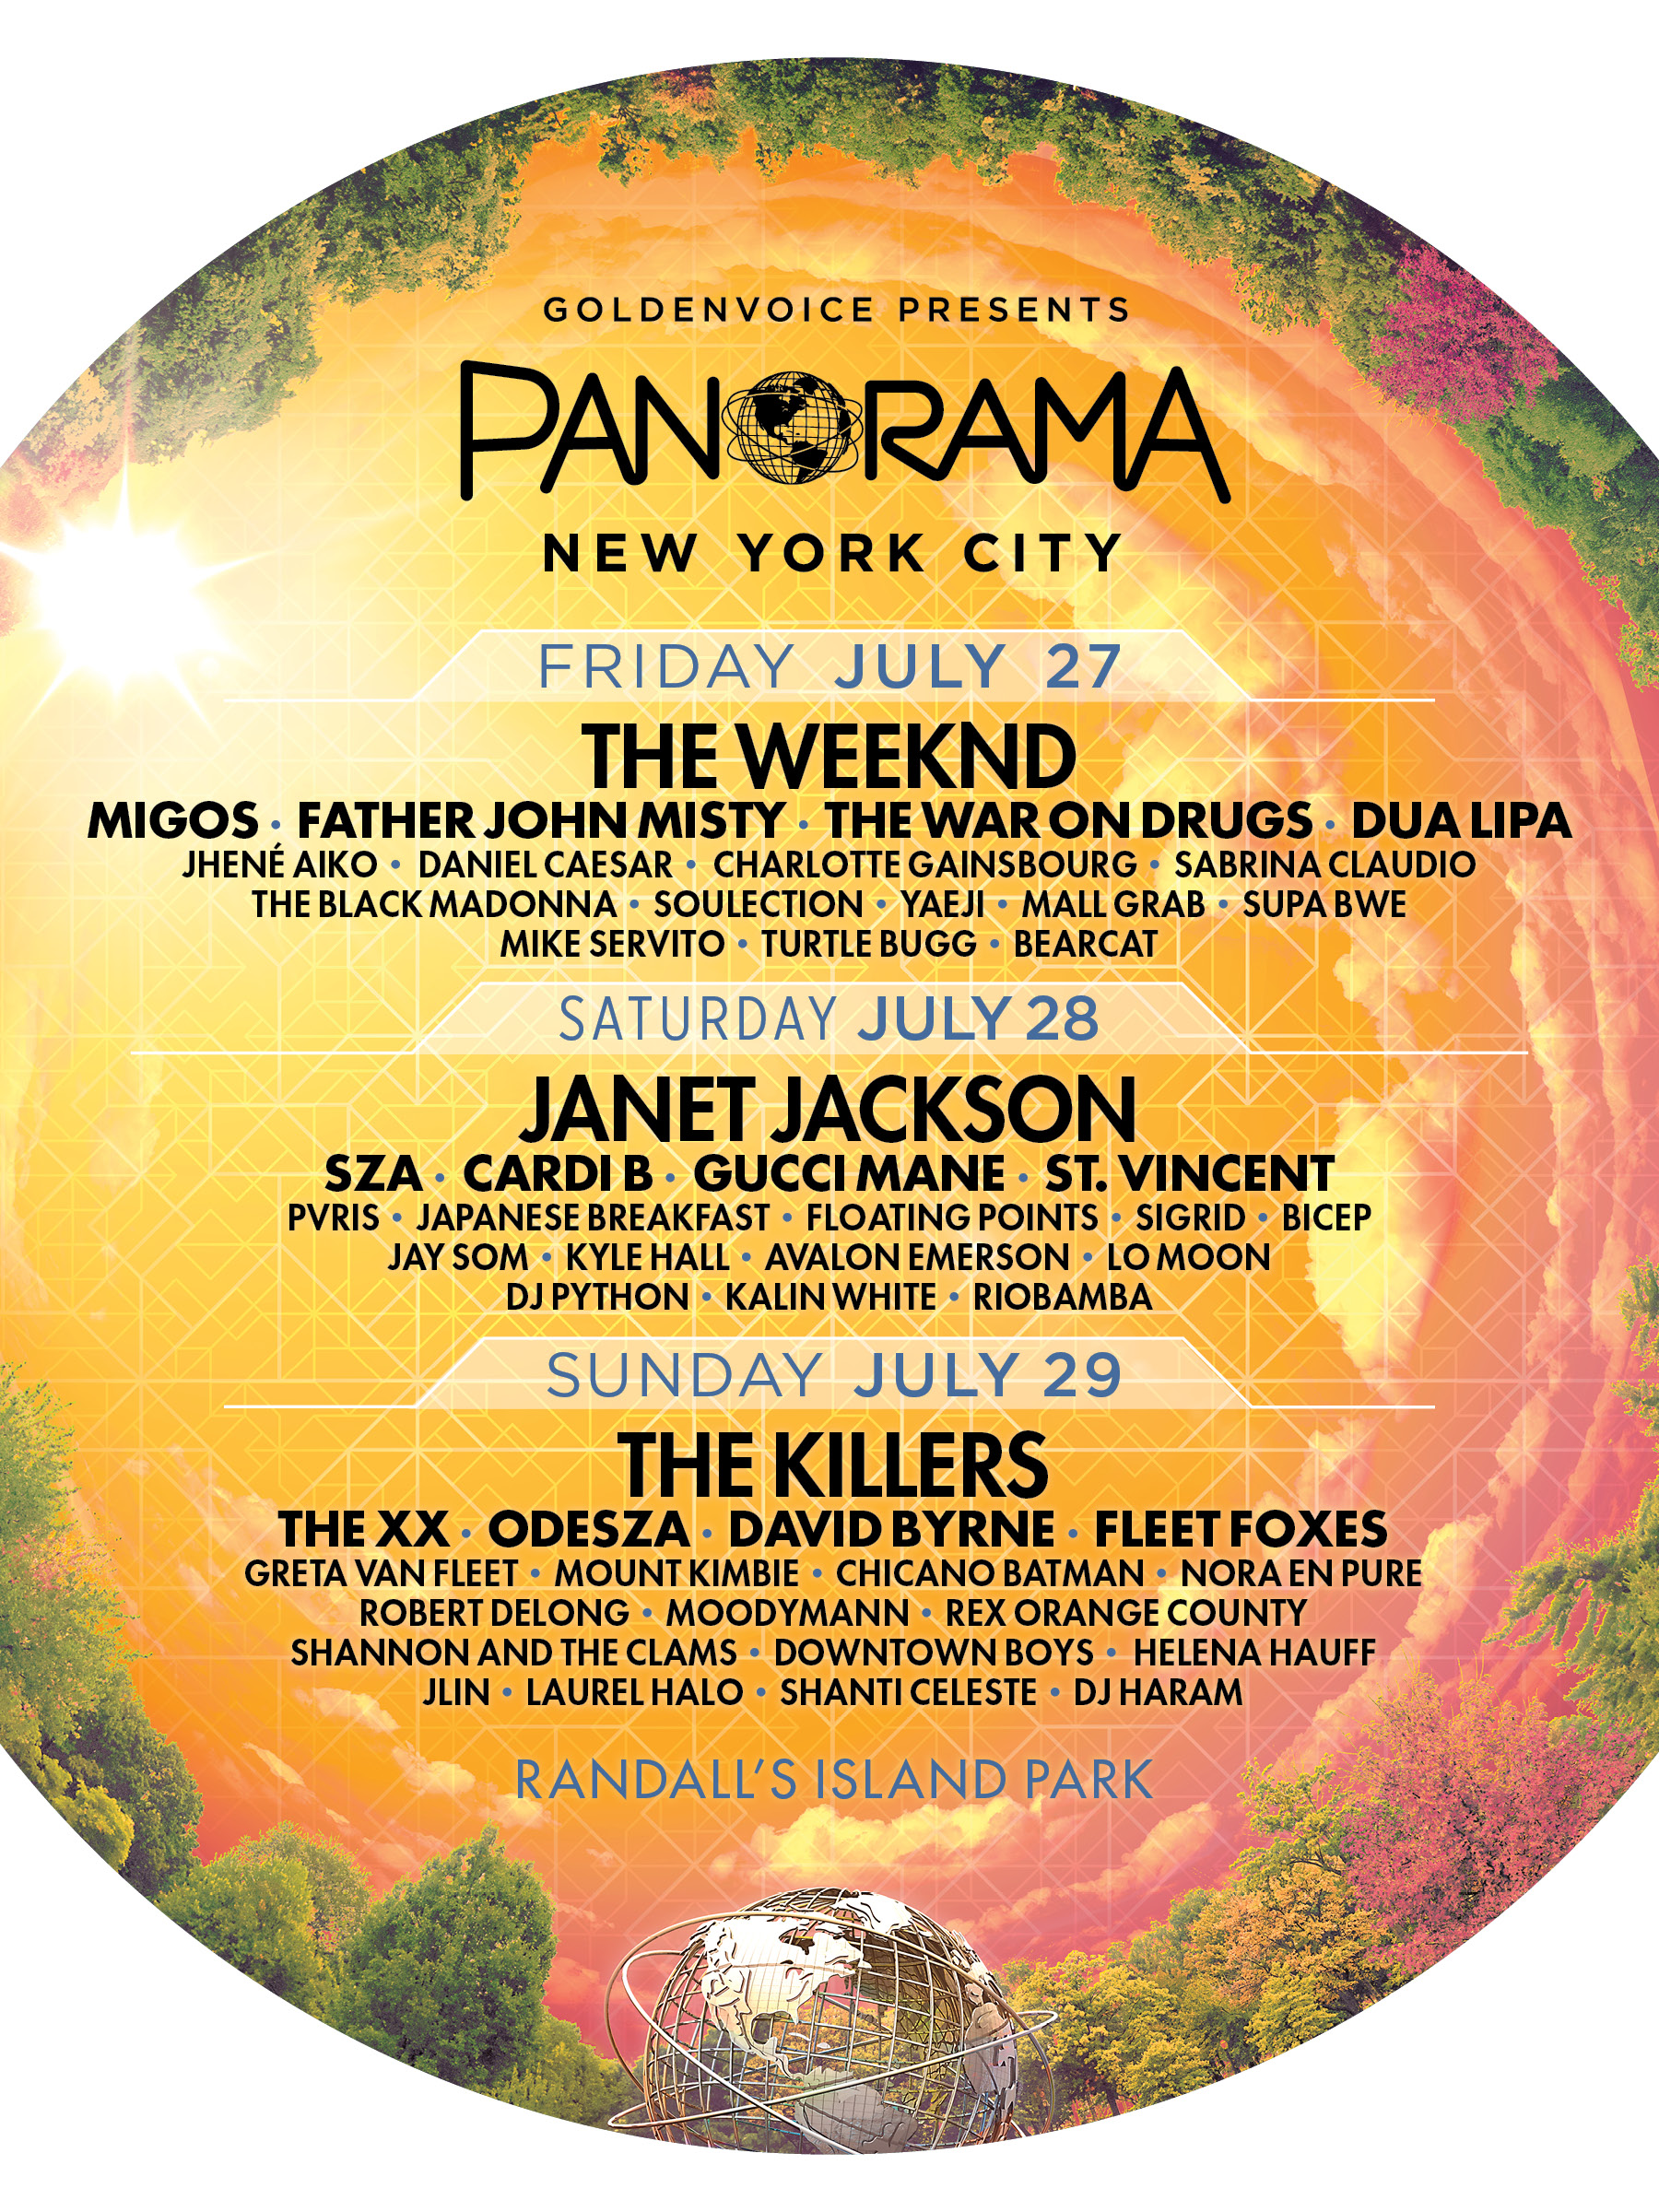 Janet Jackson, The Killers, The Weeknd, David Byrne, the xx, St. Vincent to Perform at 2018 Panorama Music Festival